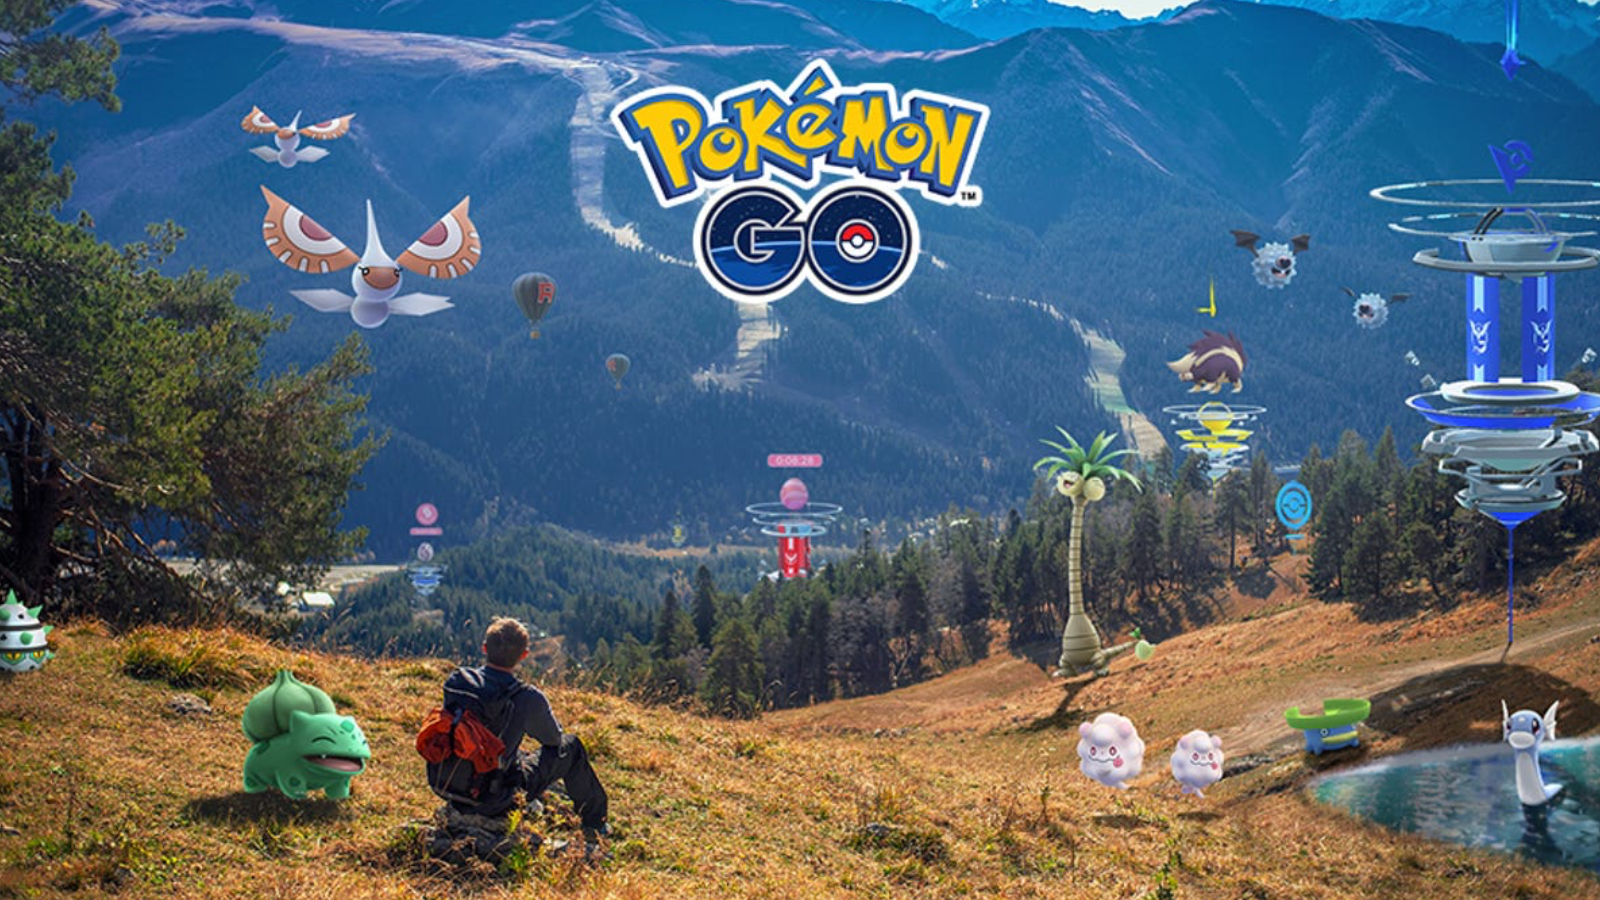 Pokémon GO live events are coming to Taiwan, the US, and the UK!